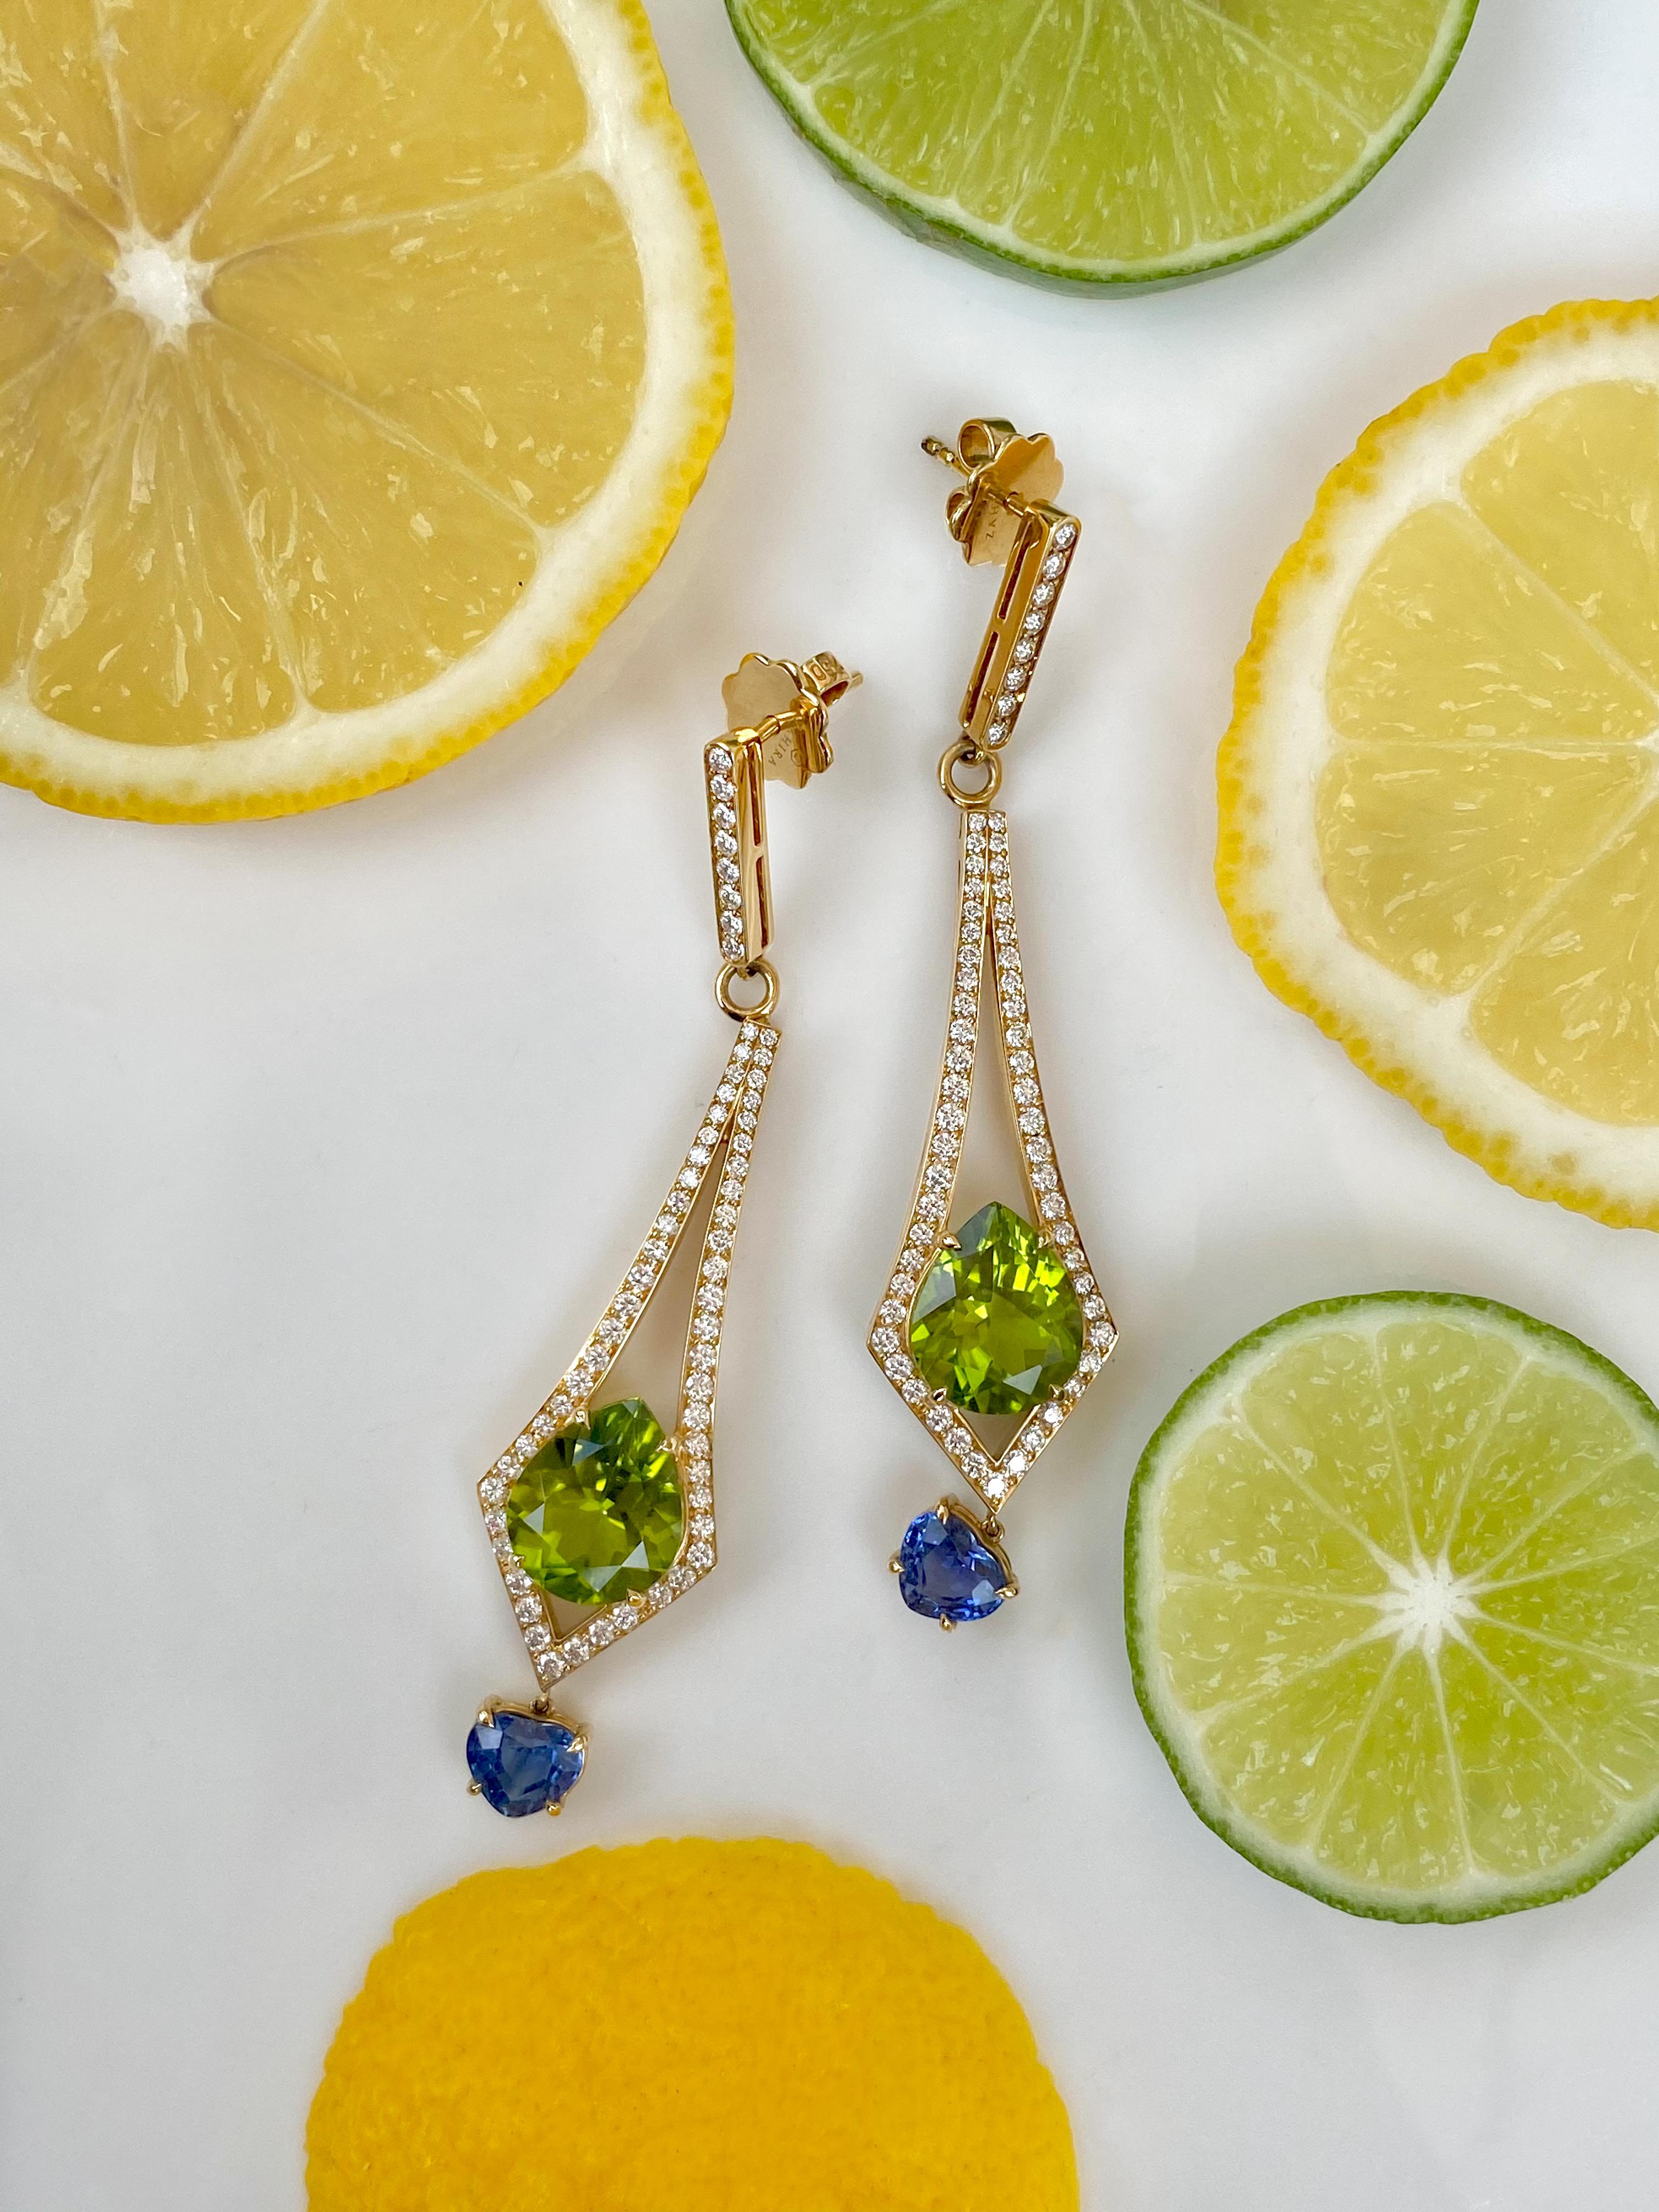 Women's 8.57 Carat Peridot and 2.26 Carat Blue Sapphire and Diamond Earrings in 18K Gold